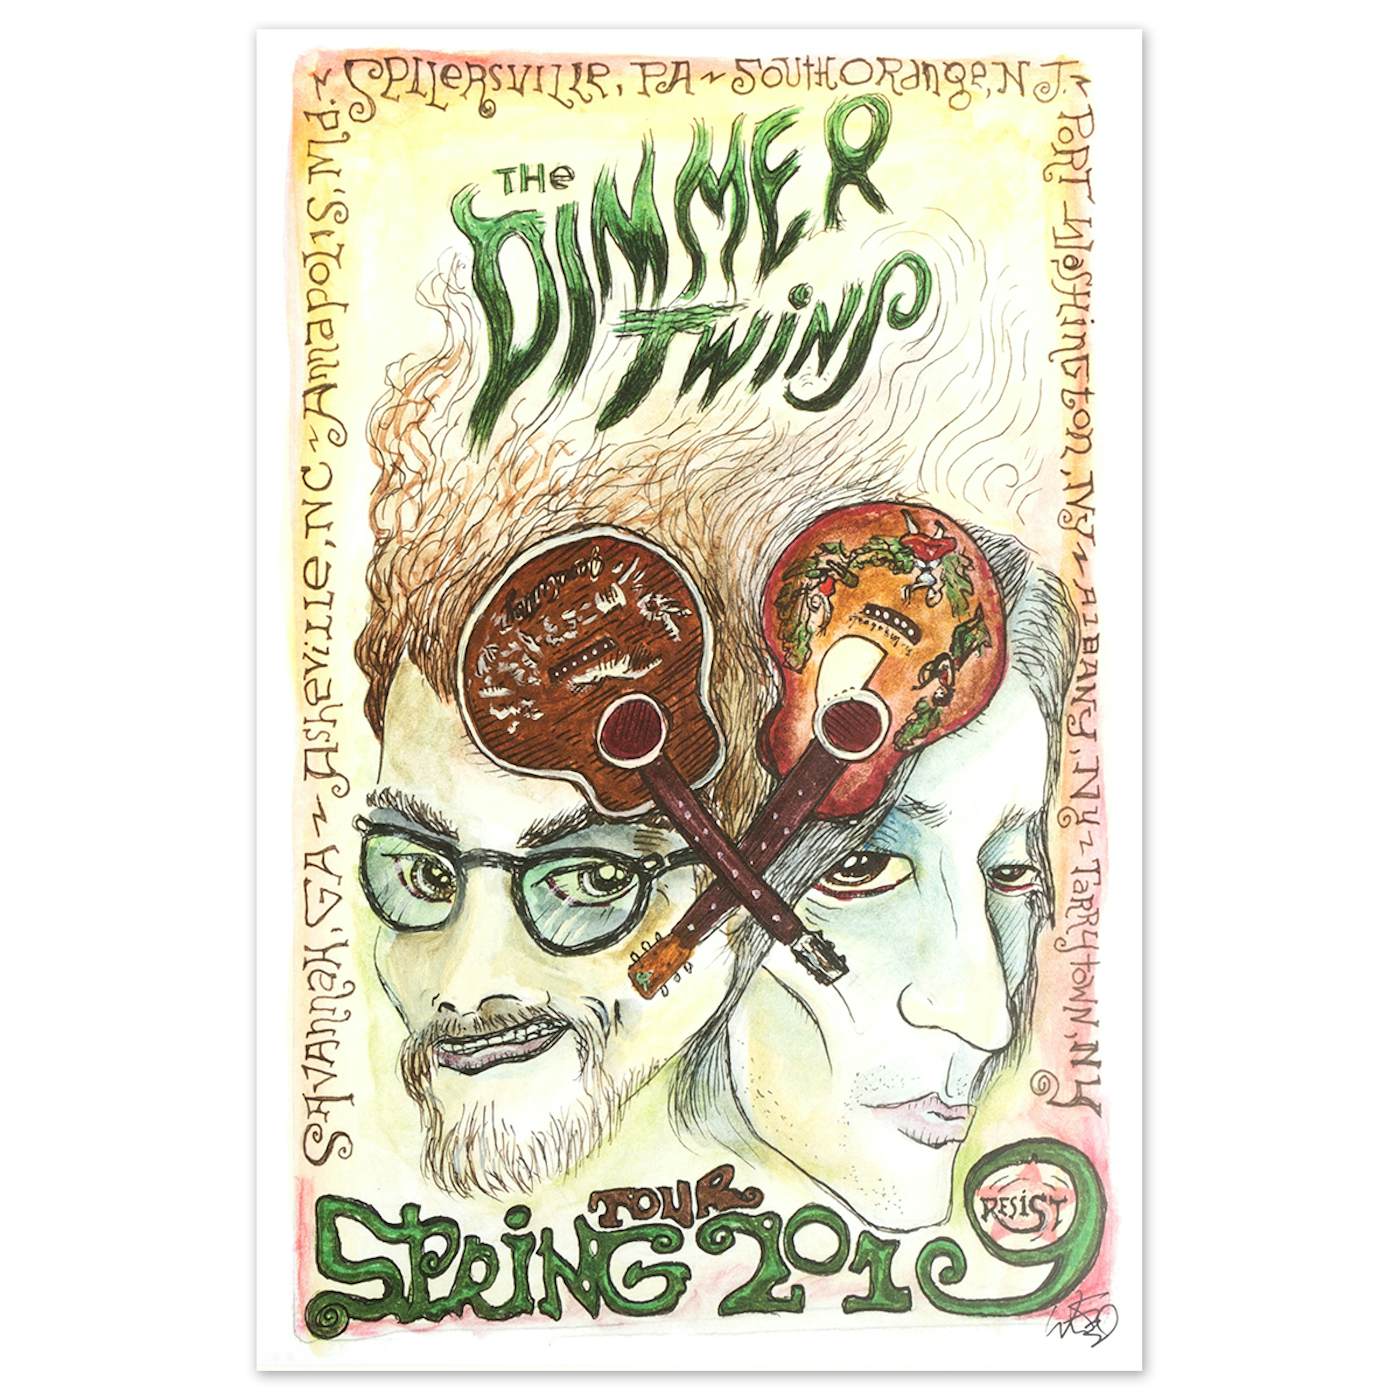 Drive-By Truckers The Dimmer Twins Spring 2019 Tour Poster